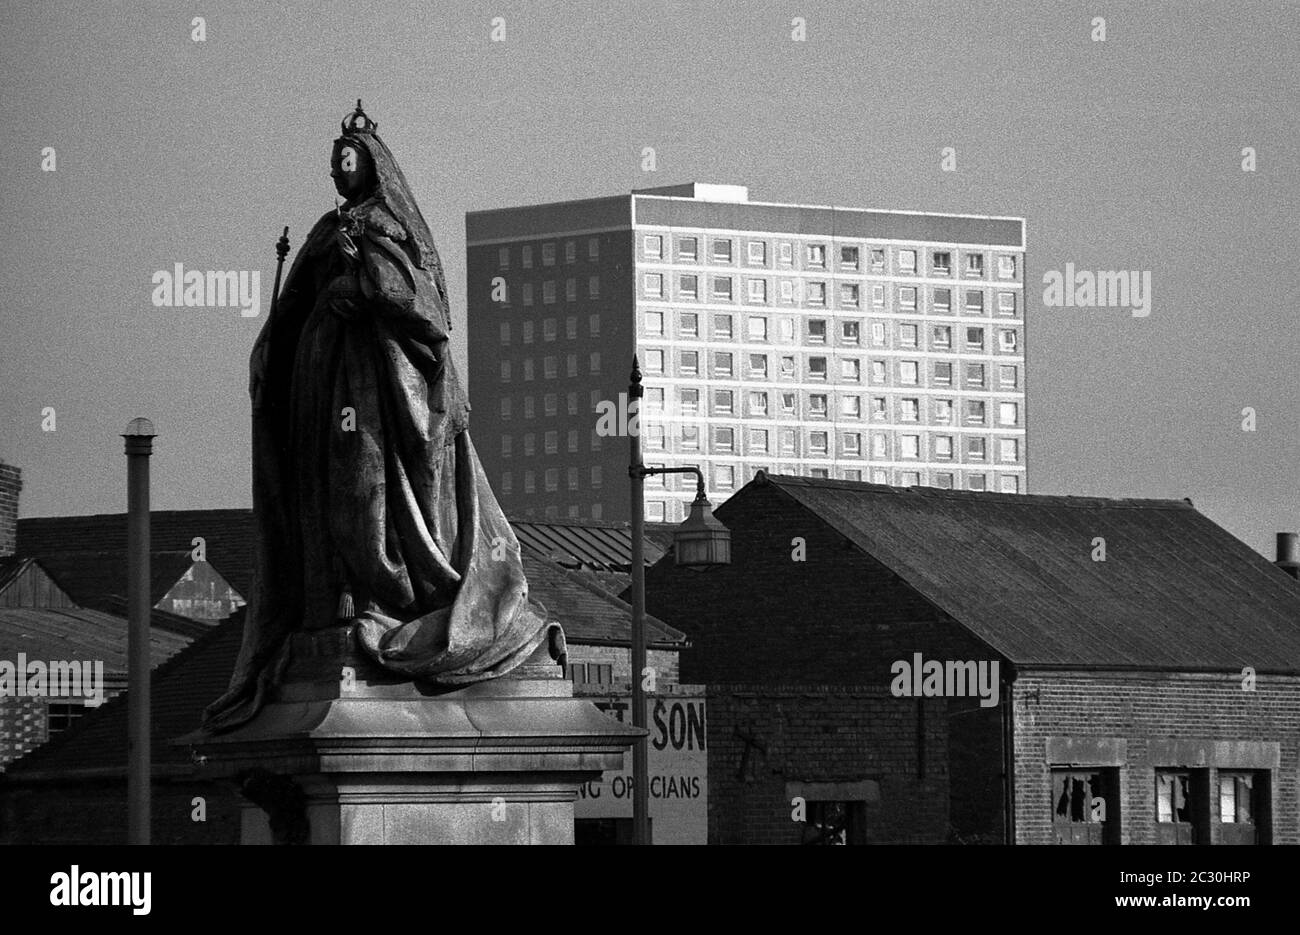 AJAXNETPHOTO. 10TH OCTOBER, 1969. PORTSMOUTH, ENGLAND. - CHANGING SKYLINE - STATUE OF QUEEN VICTORIA IN GUILDHALL SQUARE LOOKS OUT OVER SOMERS TOWN TOWER BLOCK. VIEW NOW BLOCKED BY COUNCIL OFFICES.PHOTO:JONATHAN EASTLAND/AJAX REF:356953 8 4A Stock Photo